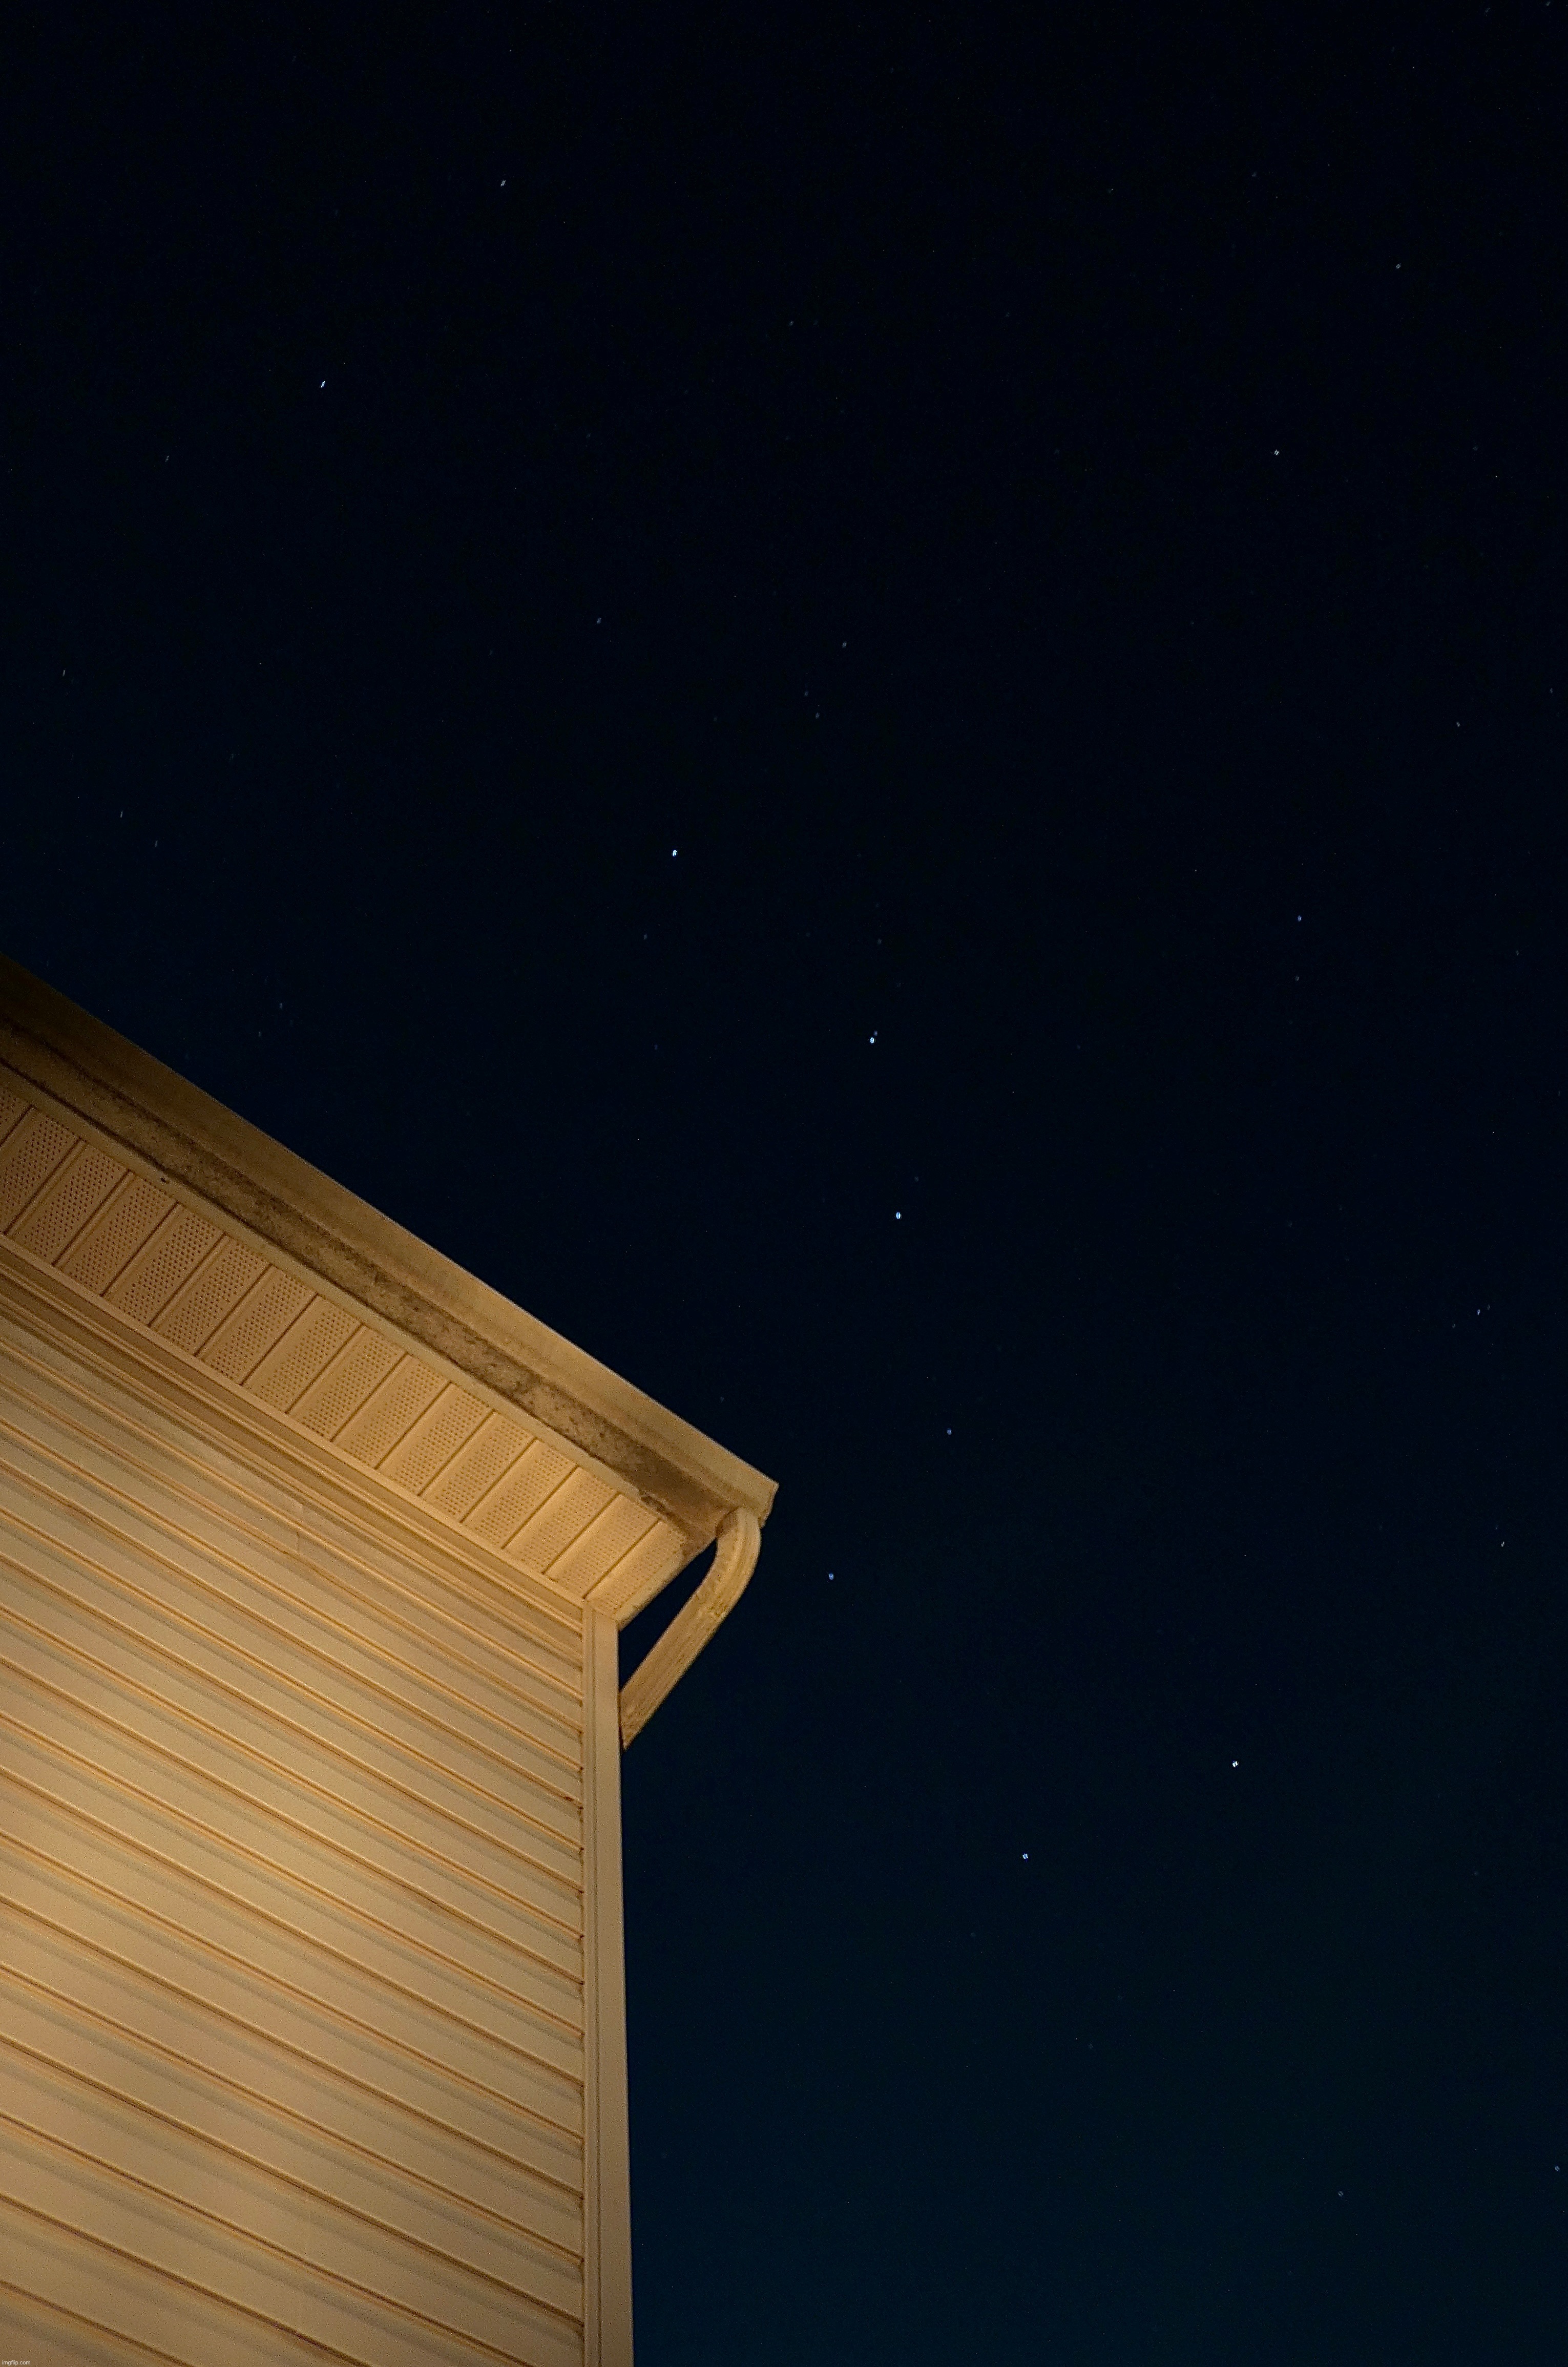 The Big Dipper | image tagged in share your own photos,lumix fz80 | made w/ Imgflip meme maker